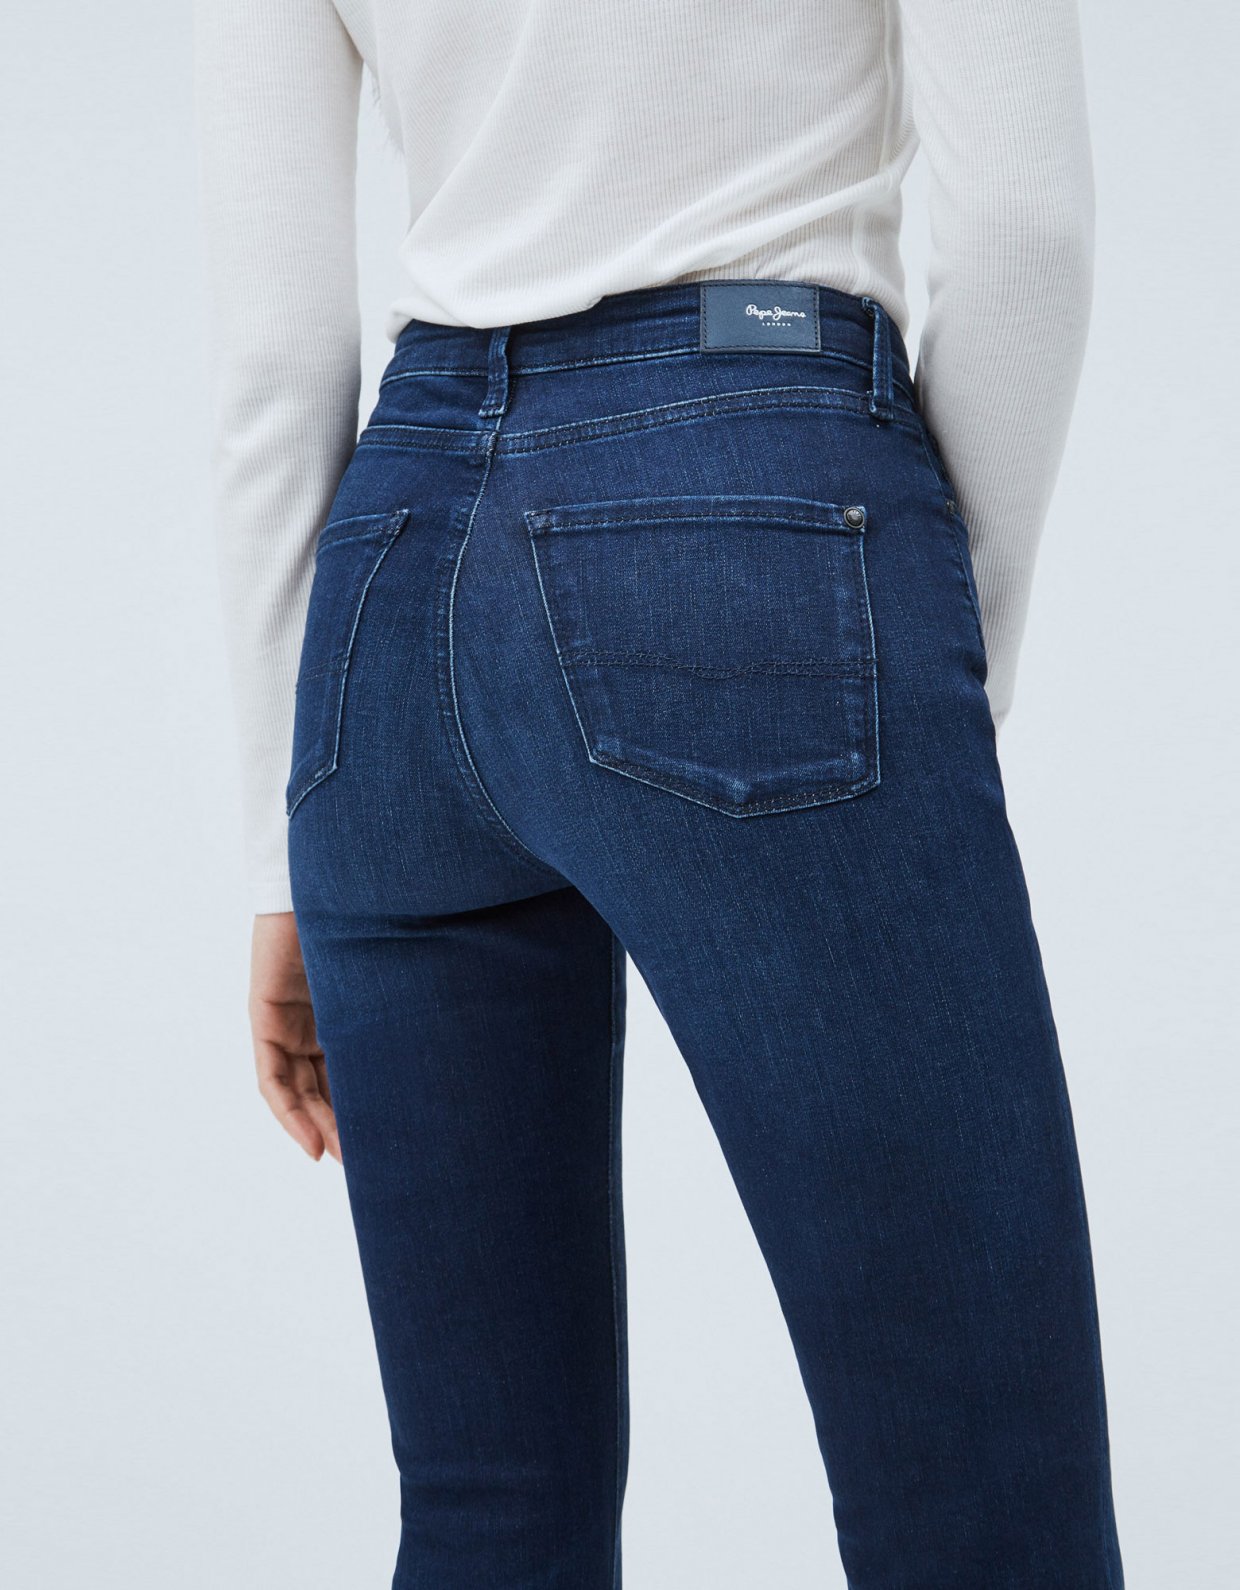 Pepe Jeans Dion flare high-waist jeans